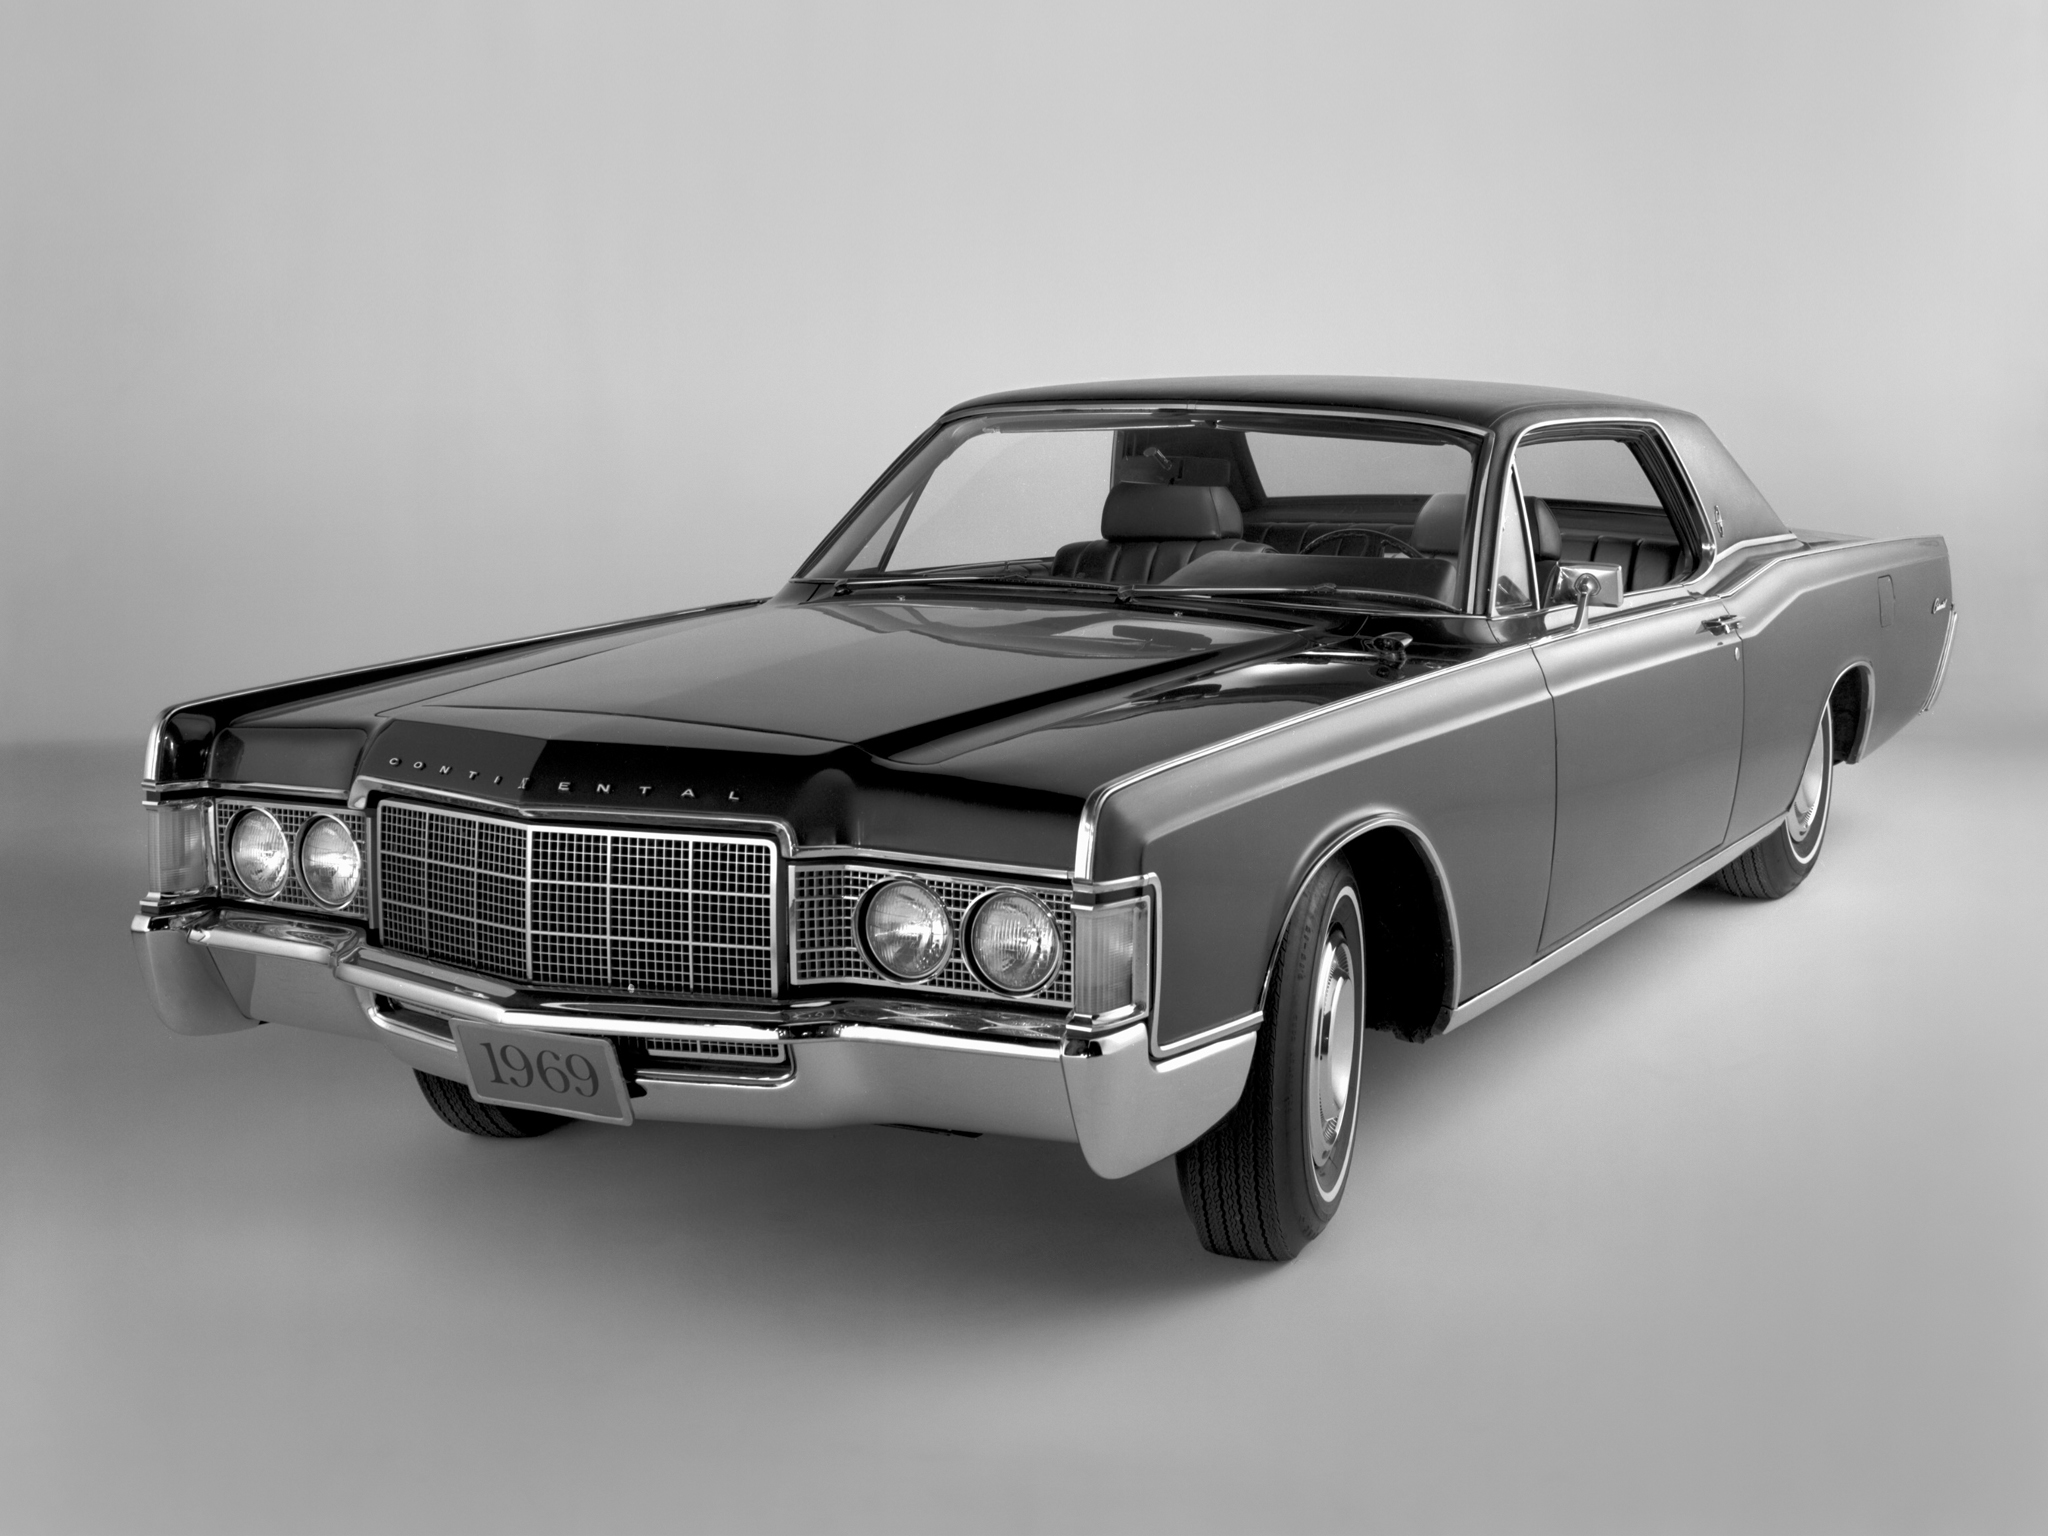 1969, Lincoln, Continental, Hardtop, Coupe, 65a, Classic, Luxury Wallpaper